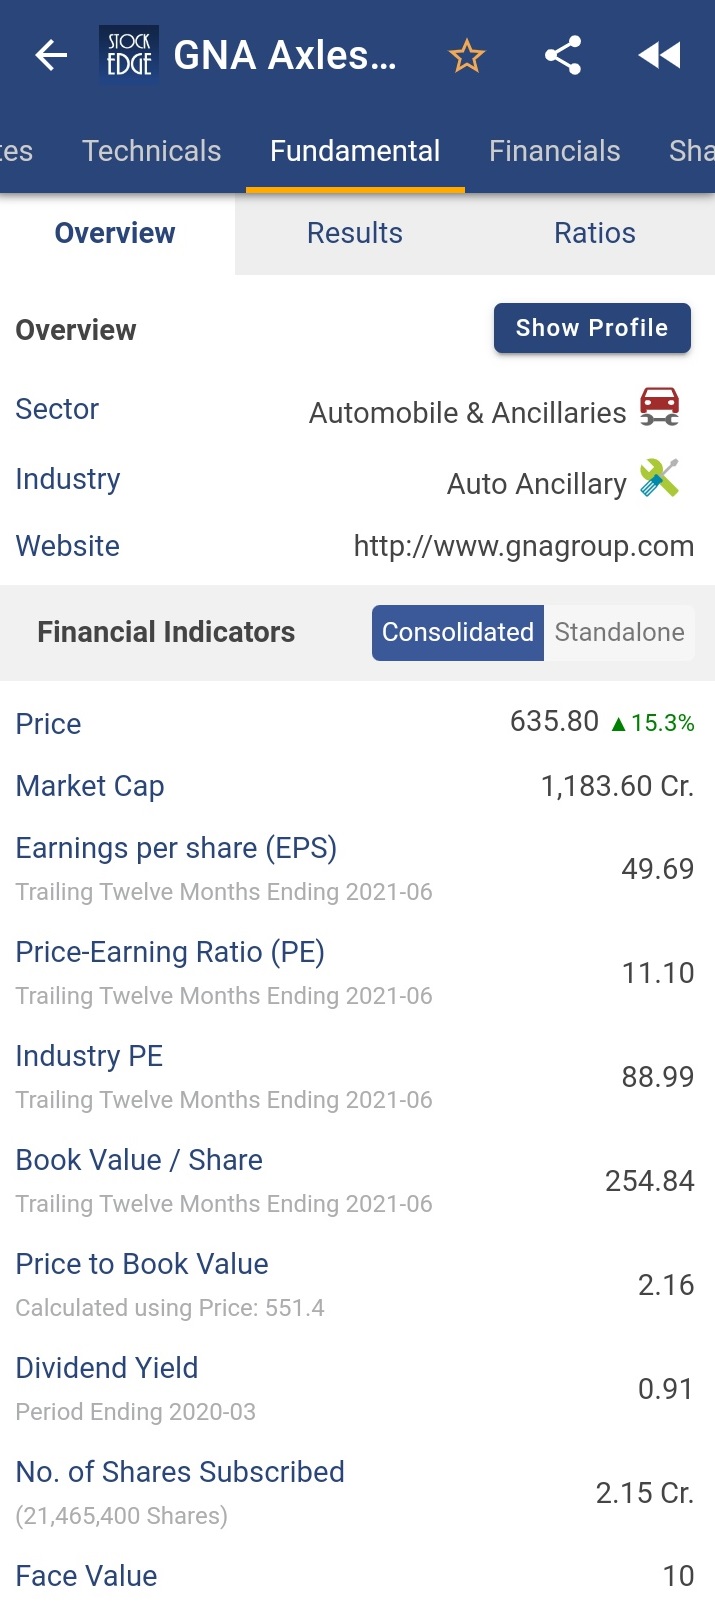 Screenshot of stockedge app displaying the financial information for gna axles ltd.